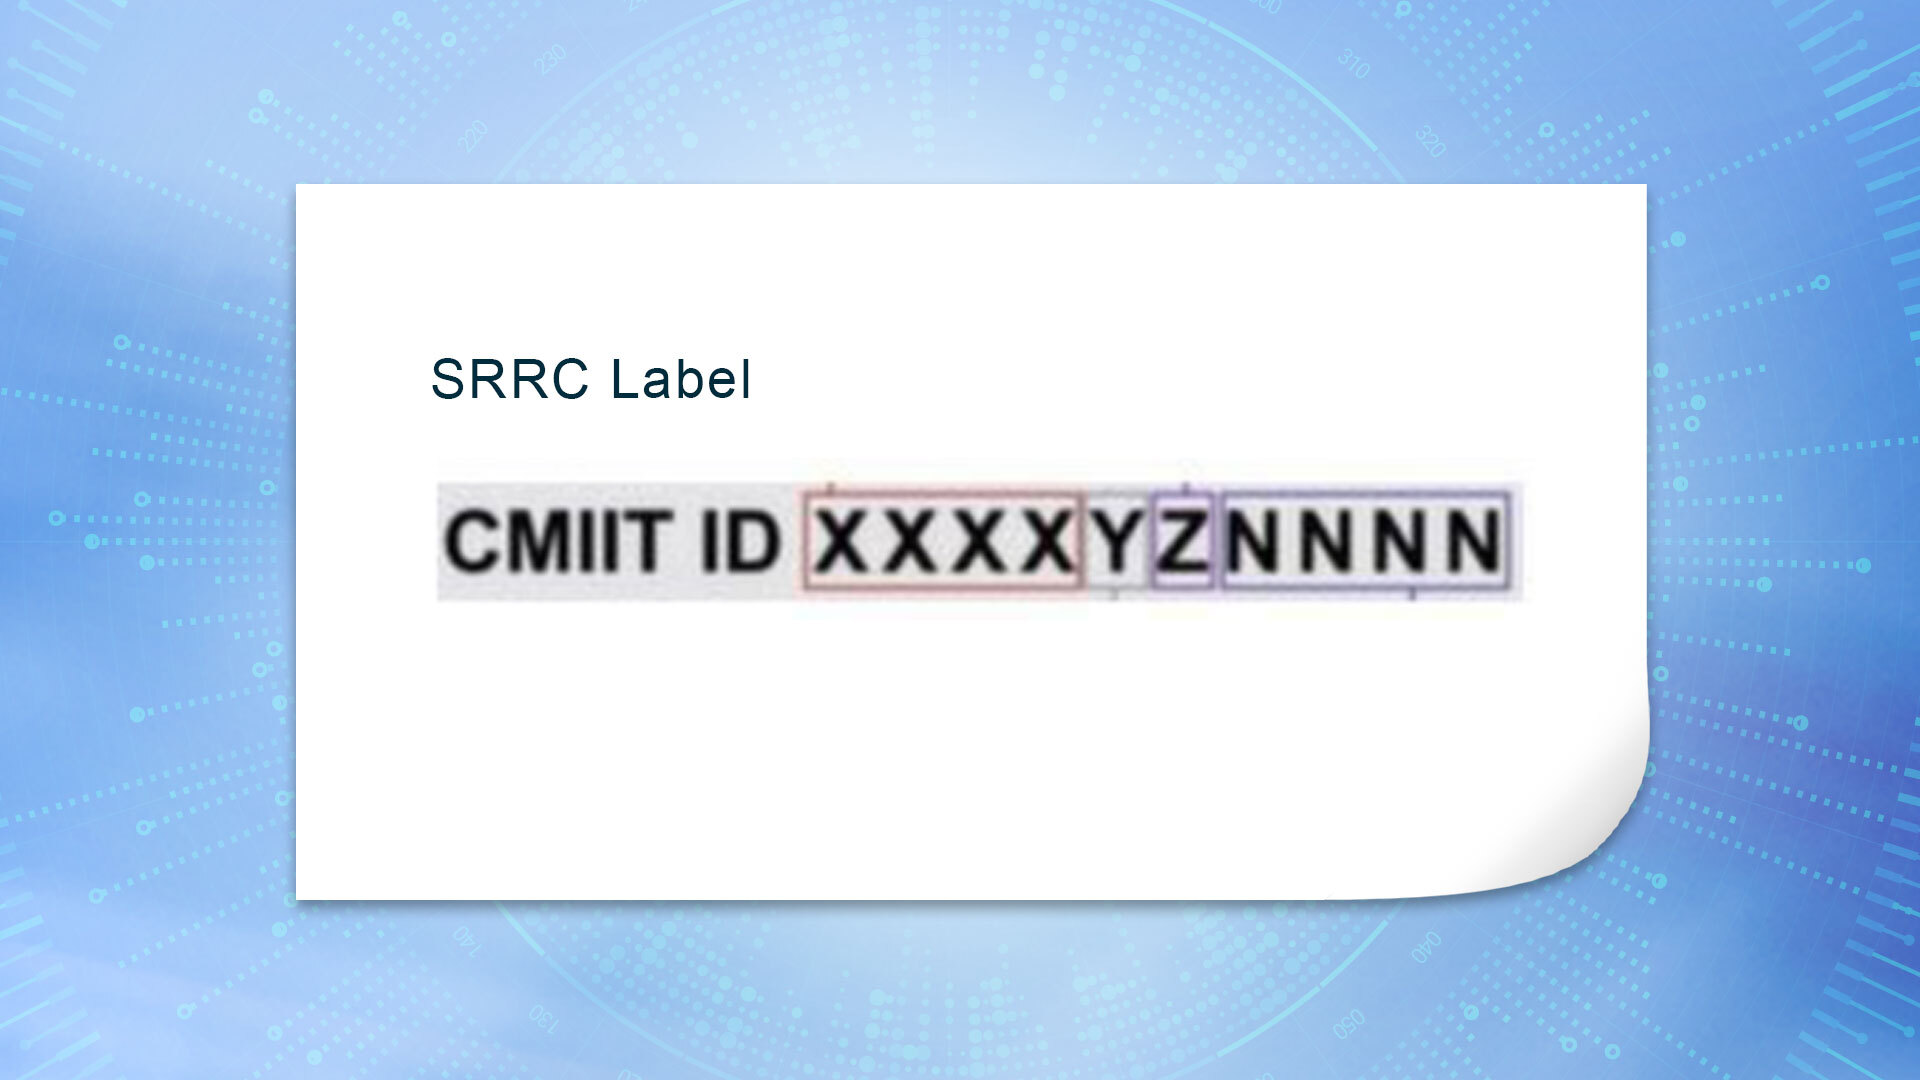 Illustration of the SRRC Label with CMIIT ID